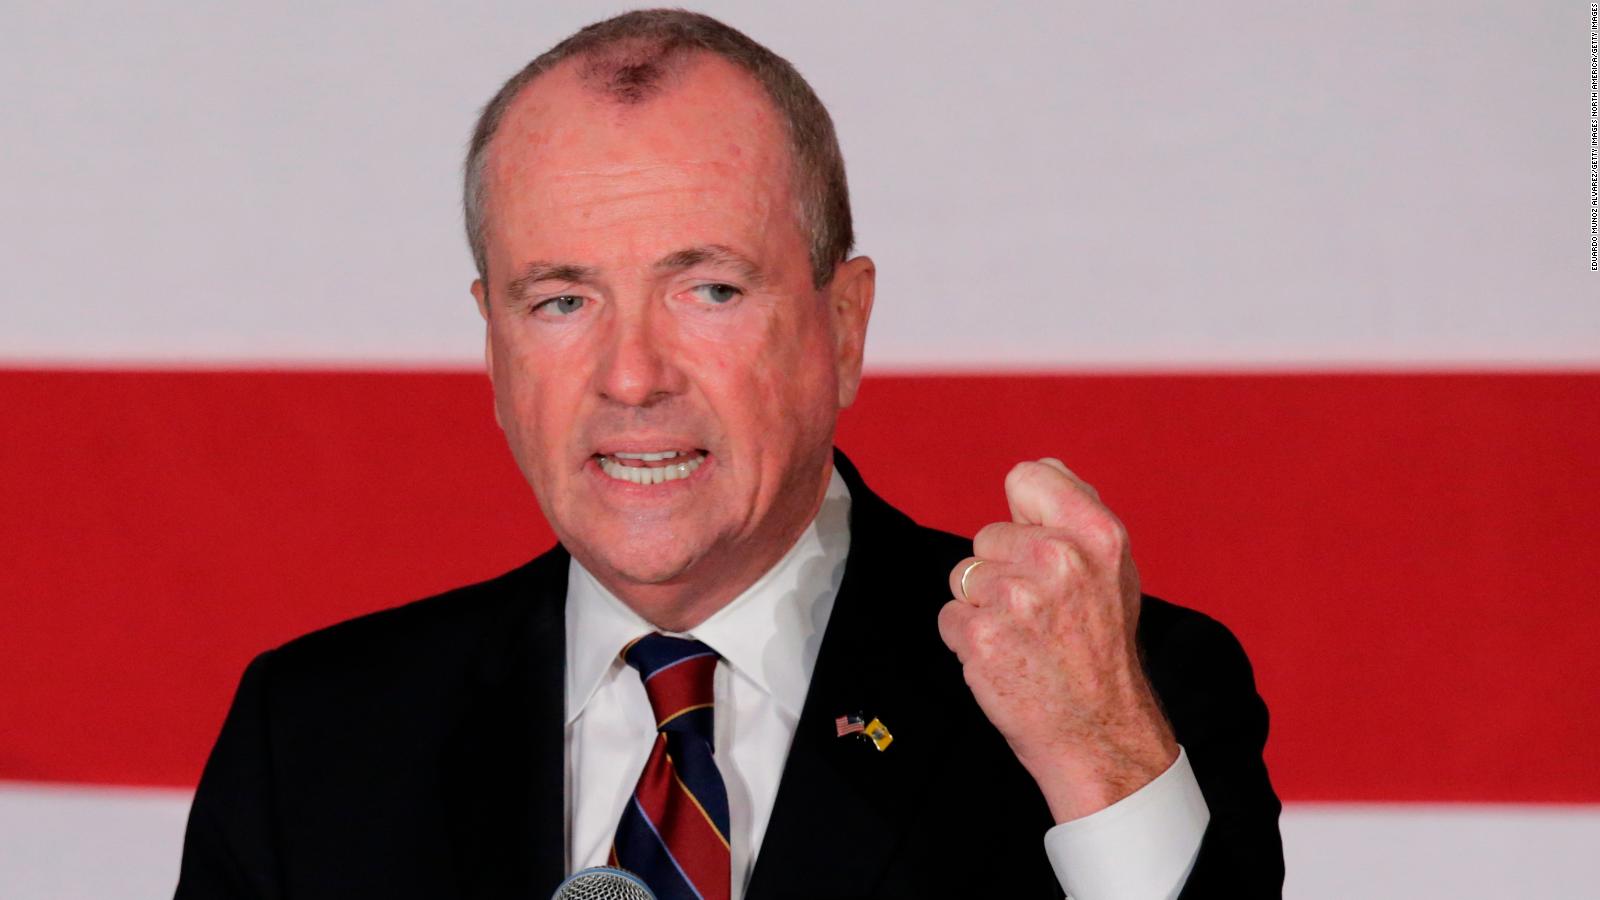 Phil Murphy elected New Jersey governor 